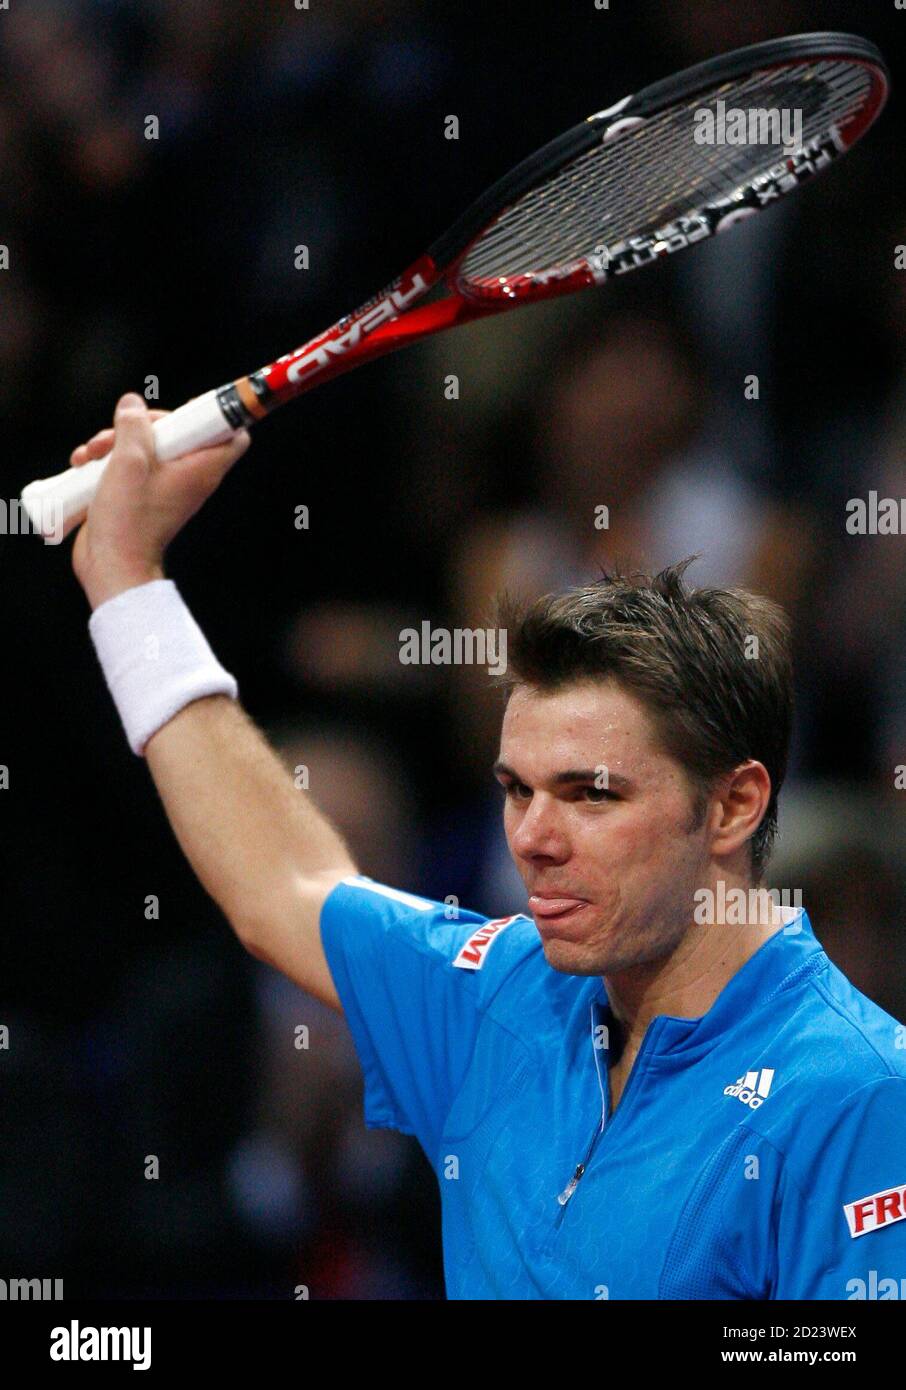 Switzerland's Stanislas Wawrinka celebrates his victory over Argentina's  David Nalbandian in their first round match at the Swiss Indoors ATP tennis  tournament in Basel October 24, 2007. REUTERS/Vincent Kessler (SWITZERLAND  Stock Photo -